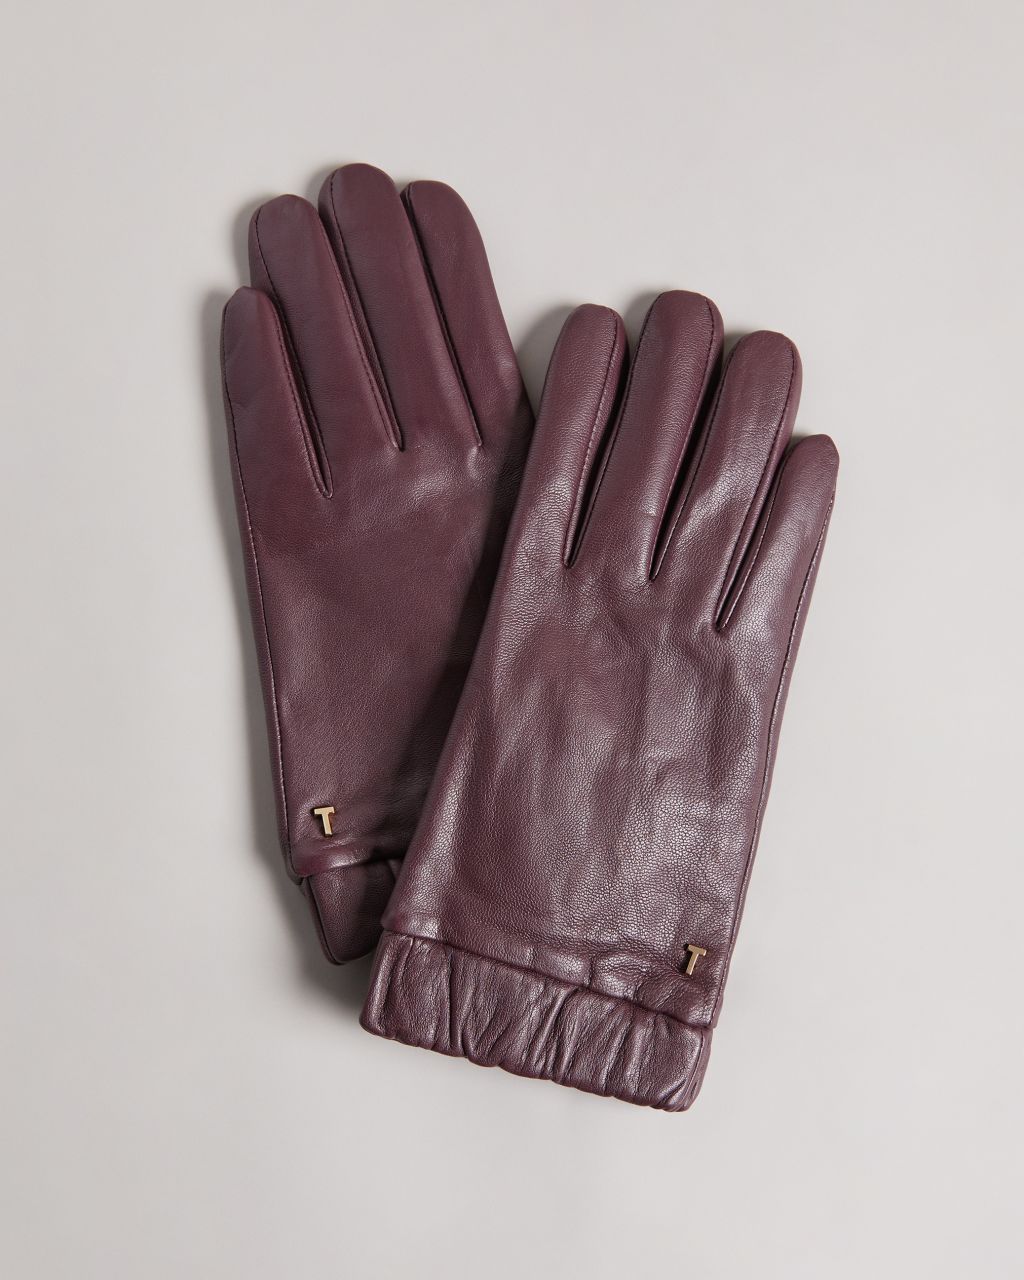 Ted Baker Women's Ruched Cuff Leather Gloves in Deep Purple, Emilli